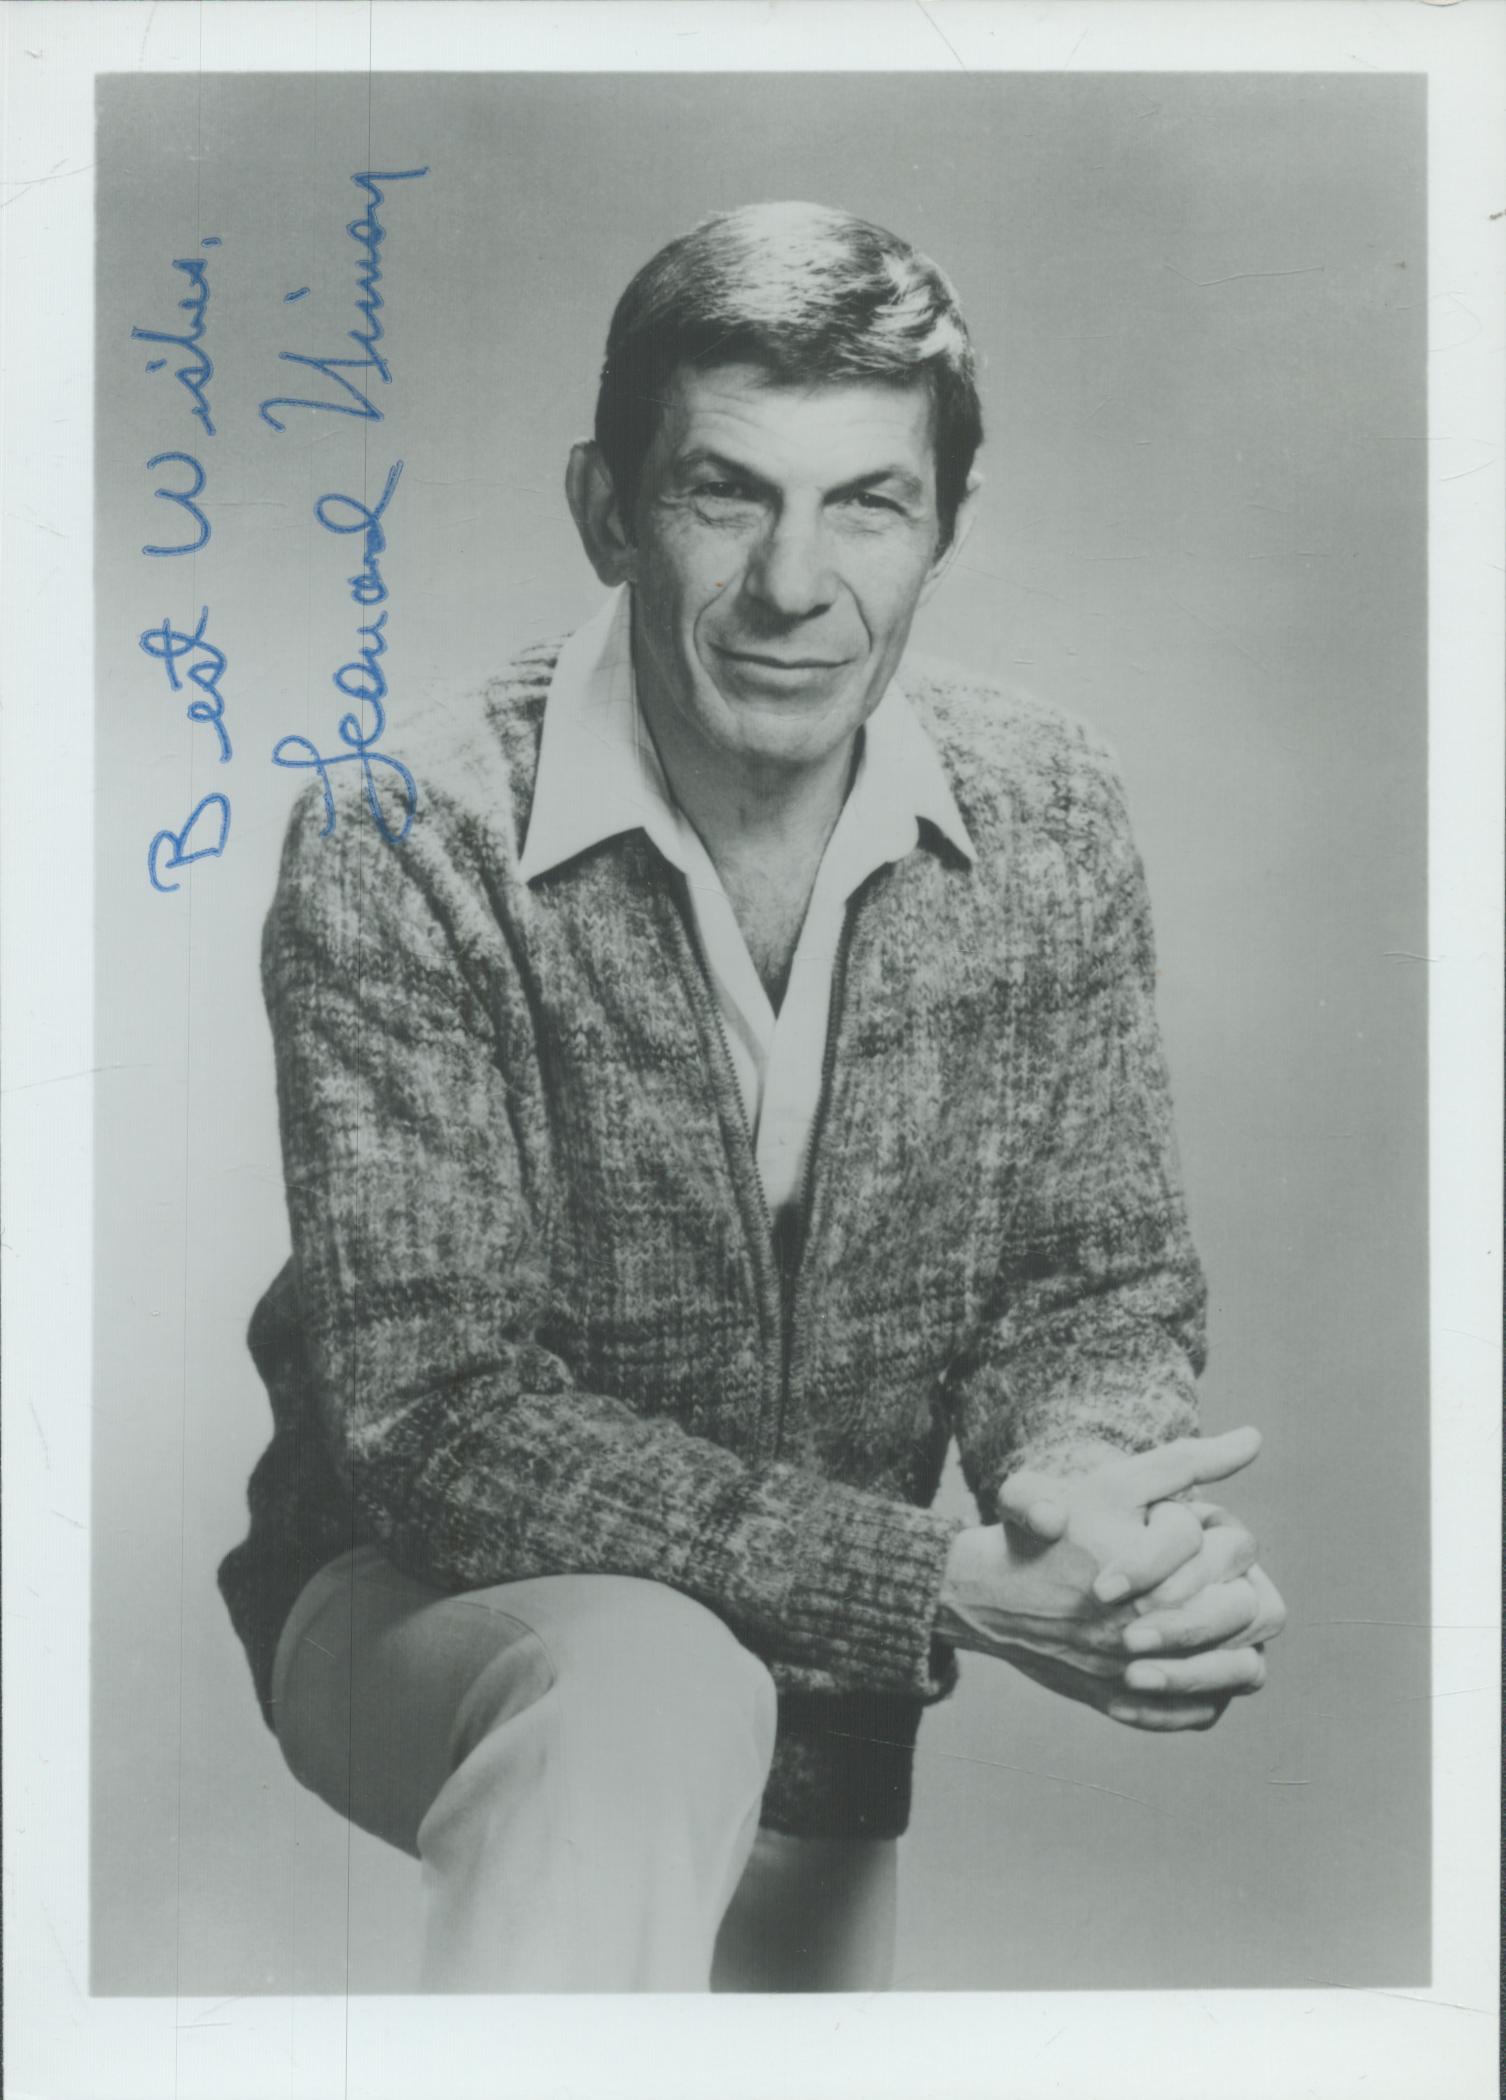 Leonard Nimoy signed 7x5 inch black and white photo. Good Condition. All autographs come with a